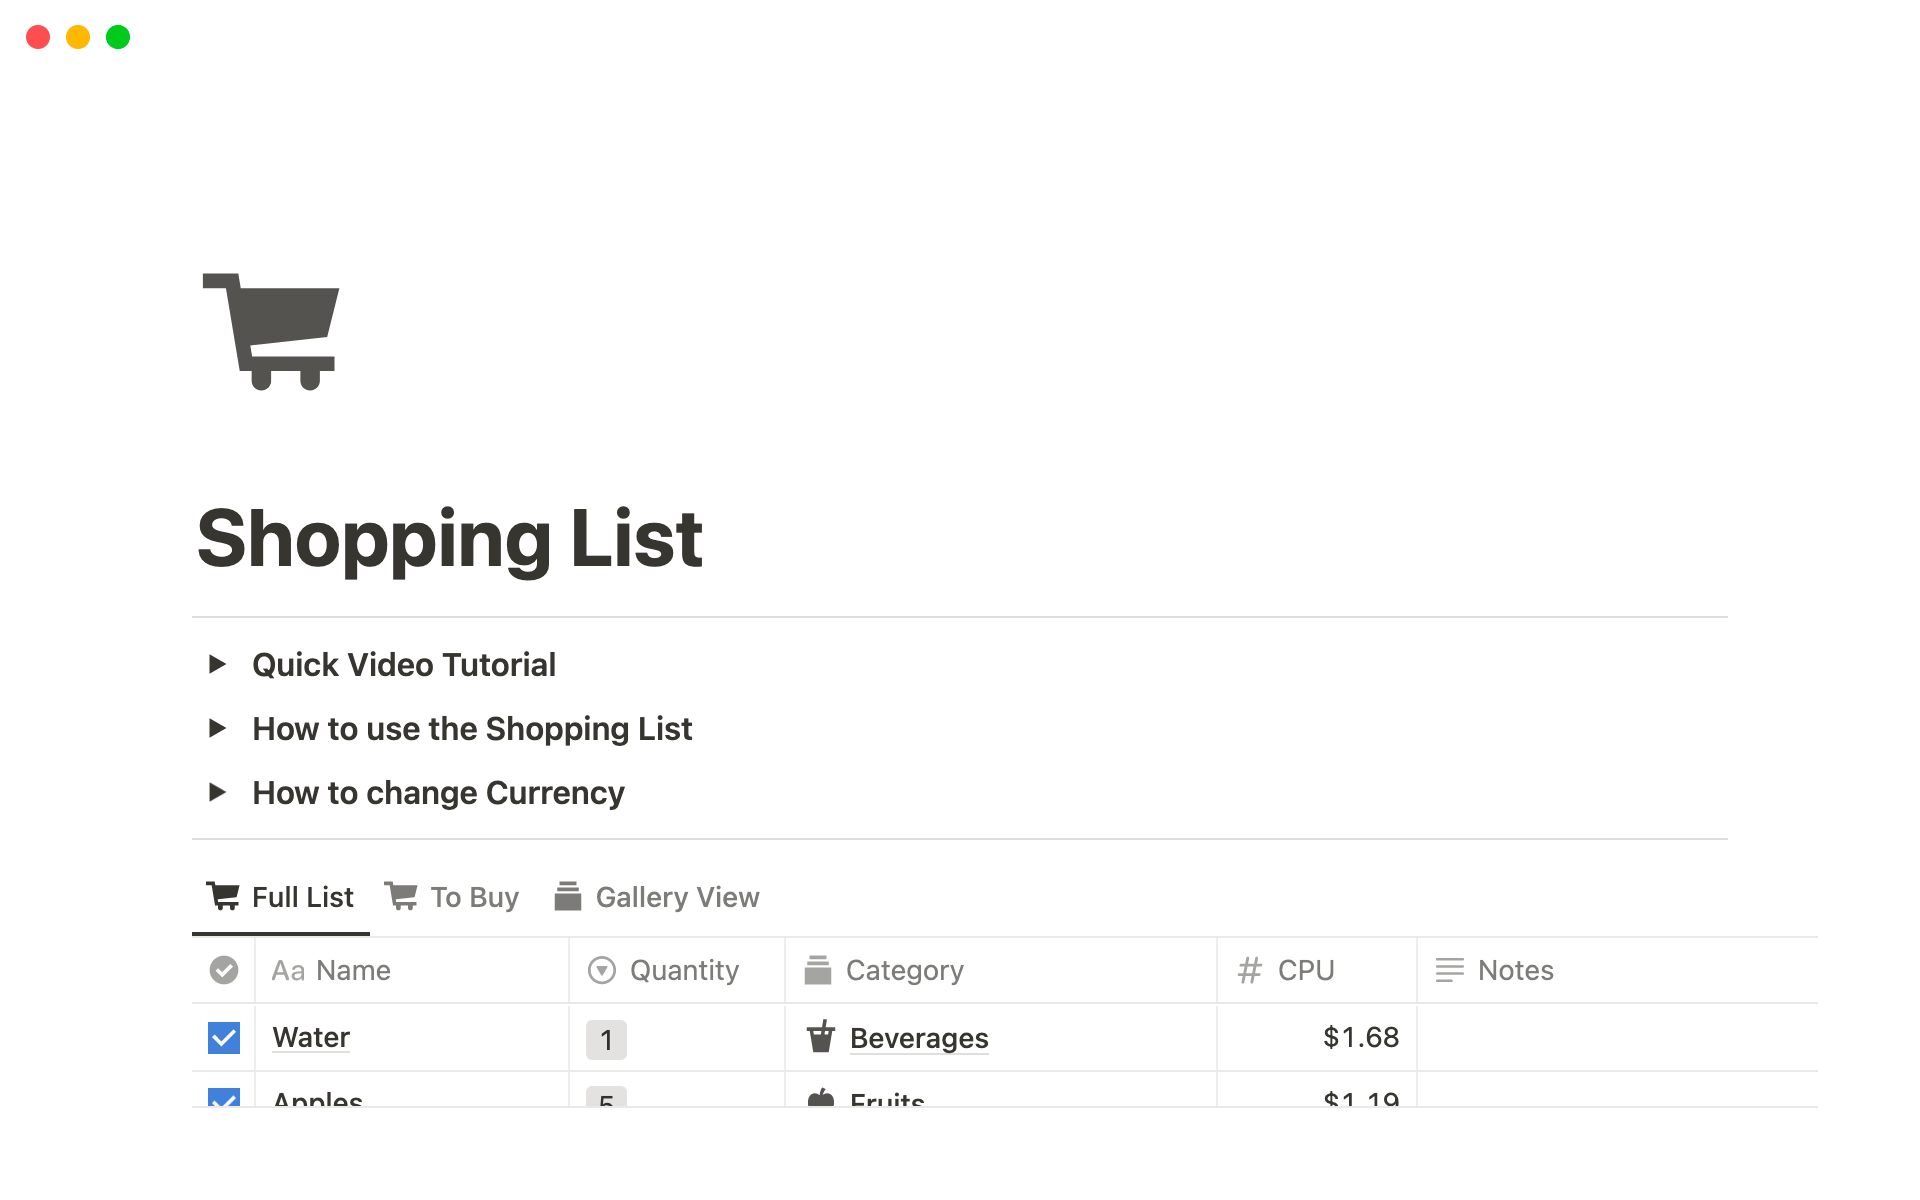 This template is a free shopping list tool designed to help you organize your grocery purchases.